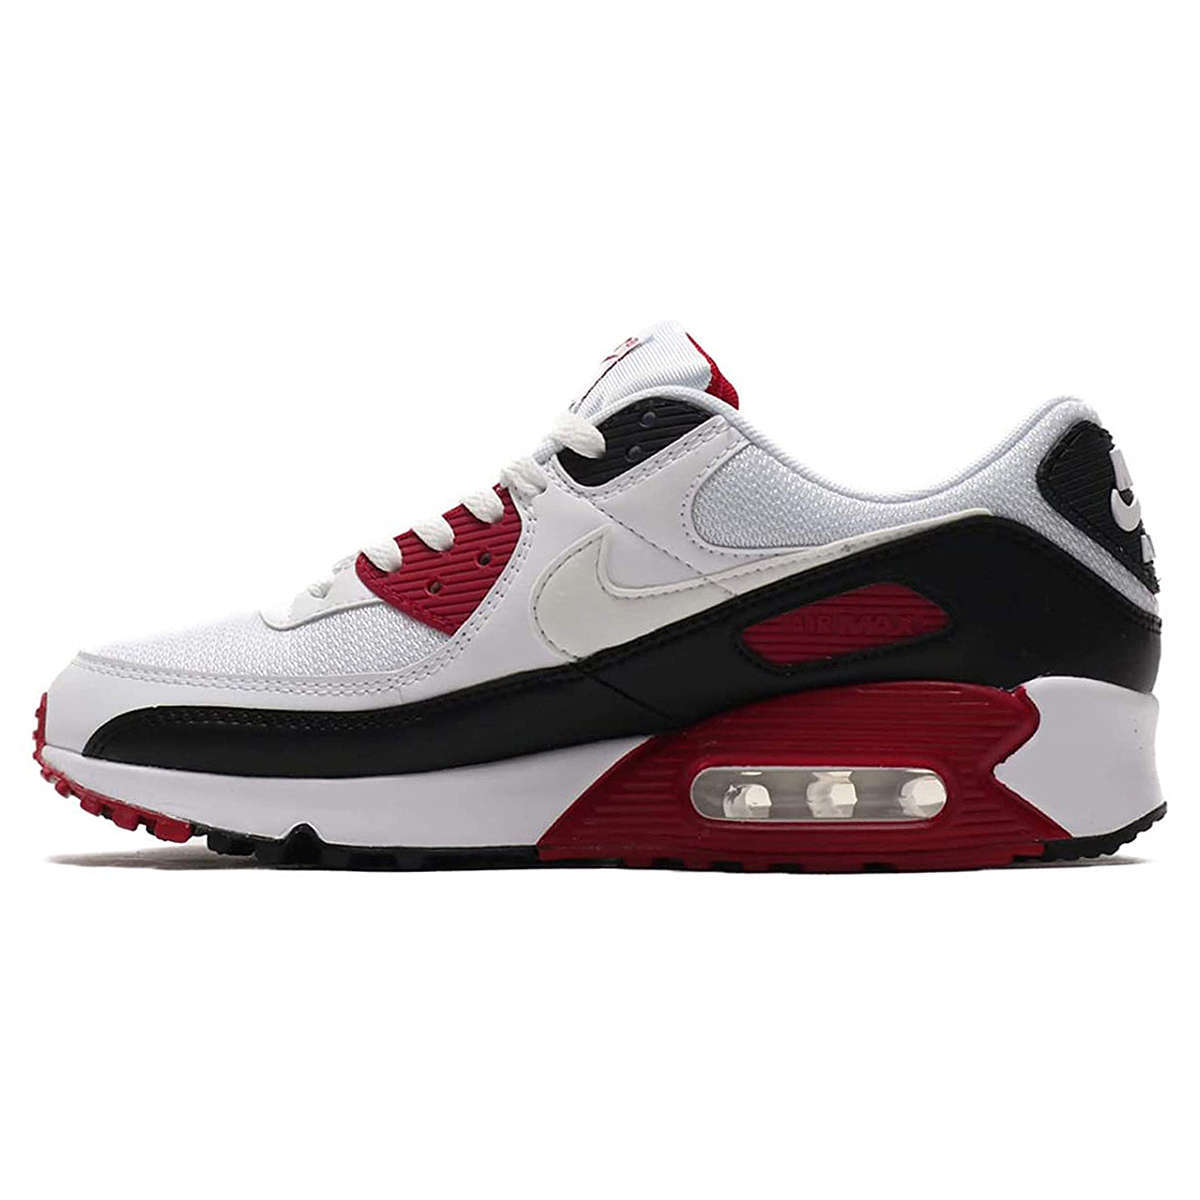 Nike Air Max 90 Leather Textile Unisex Low-Top Trainers#color_white maroon black